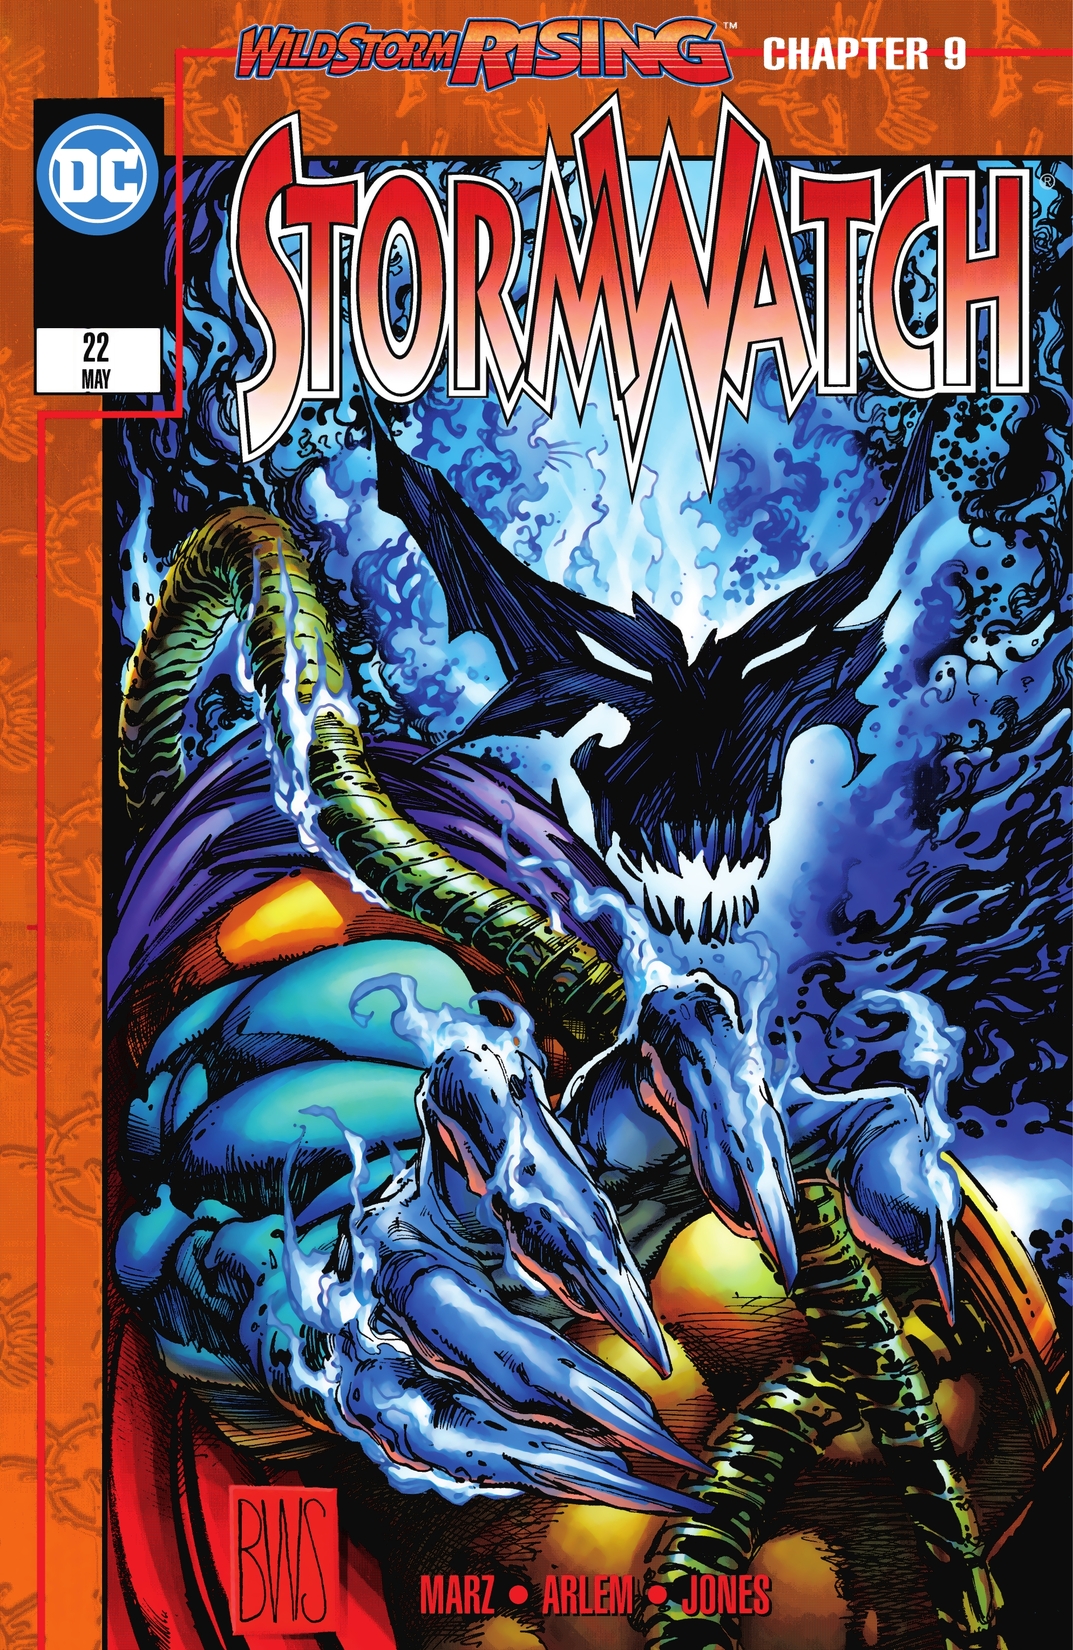 Stormwatch (1993-1997) #22 preview images